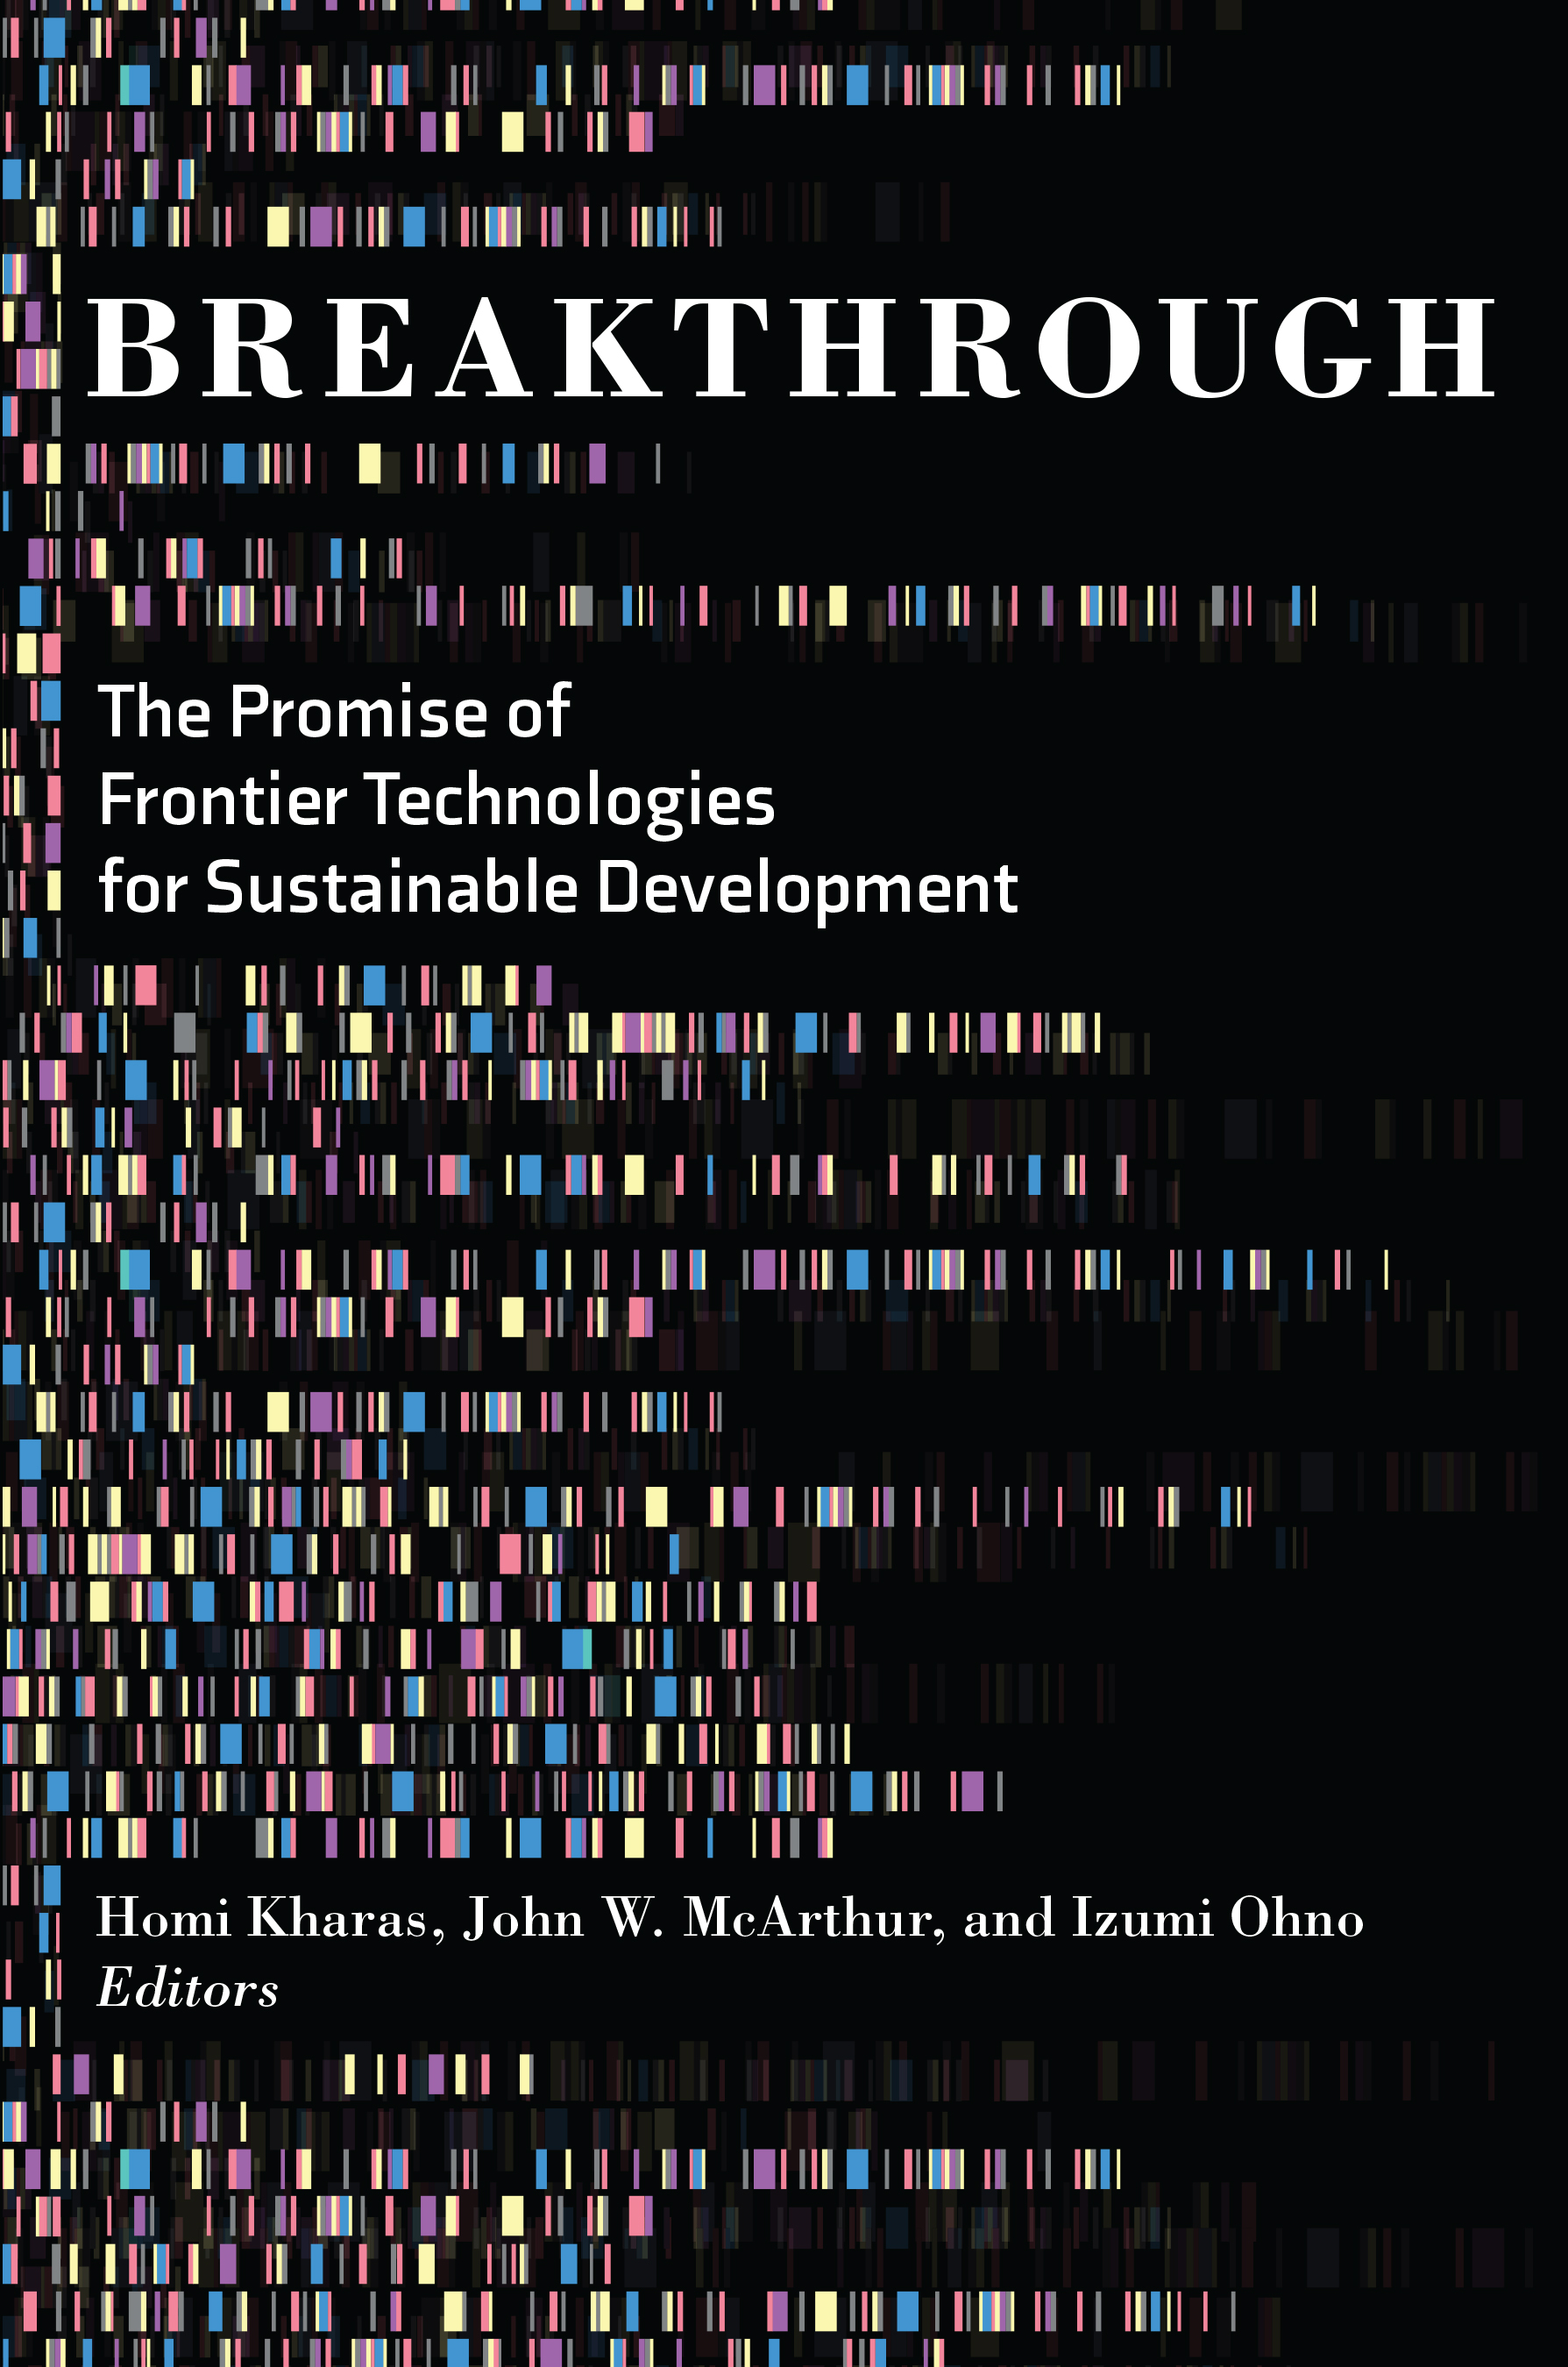 Breakthrough: The Promise of Frontier Technologies for Sustainable Development